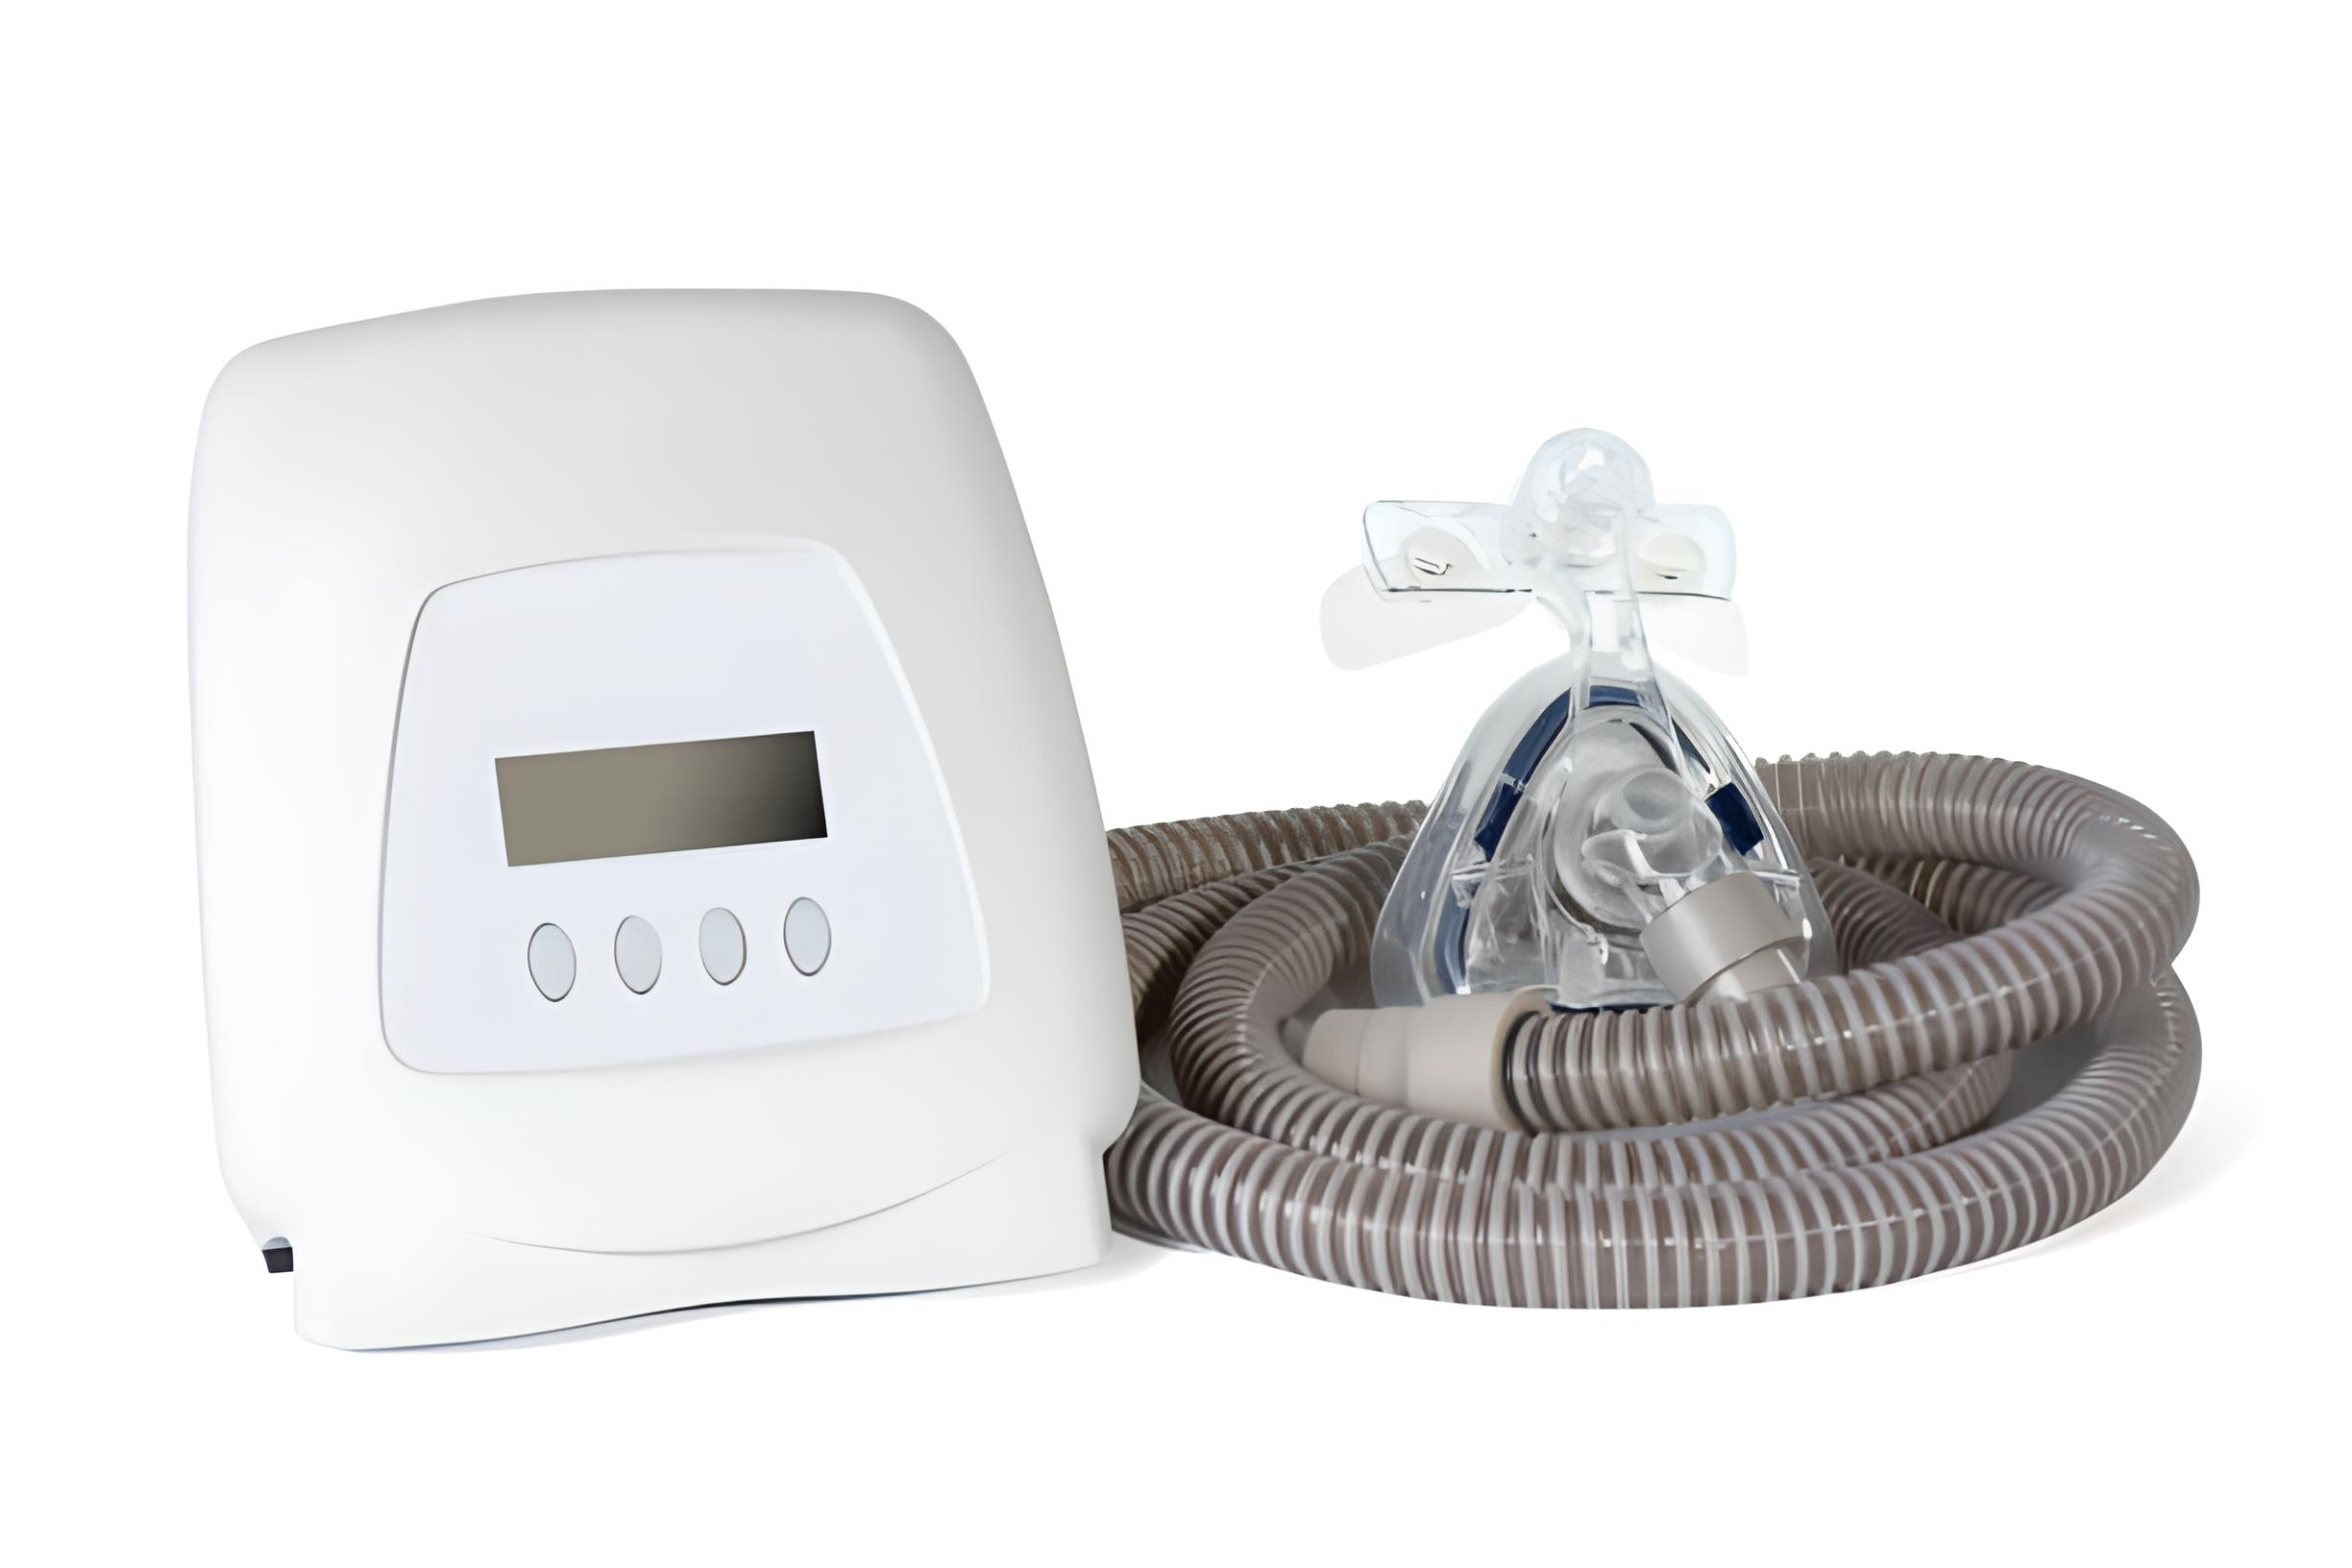 A CPAP machine with a face mask and hose, relevant to the use of distilled vs bottled water.